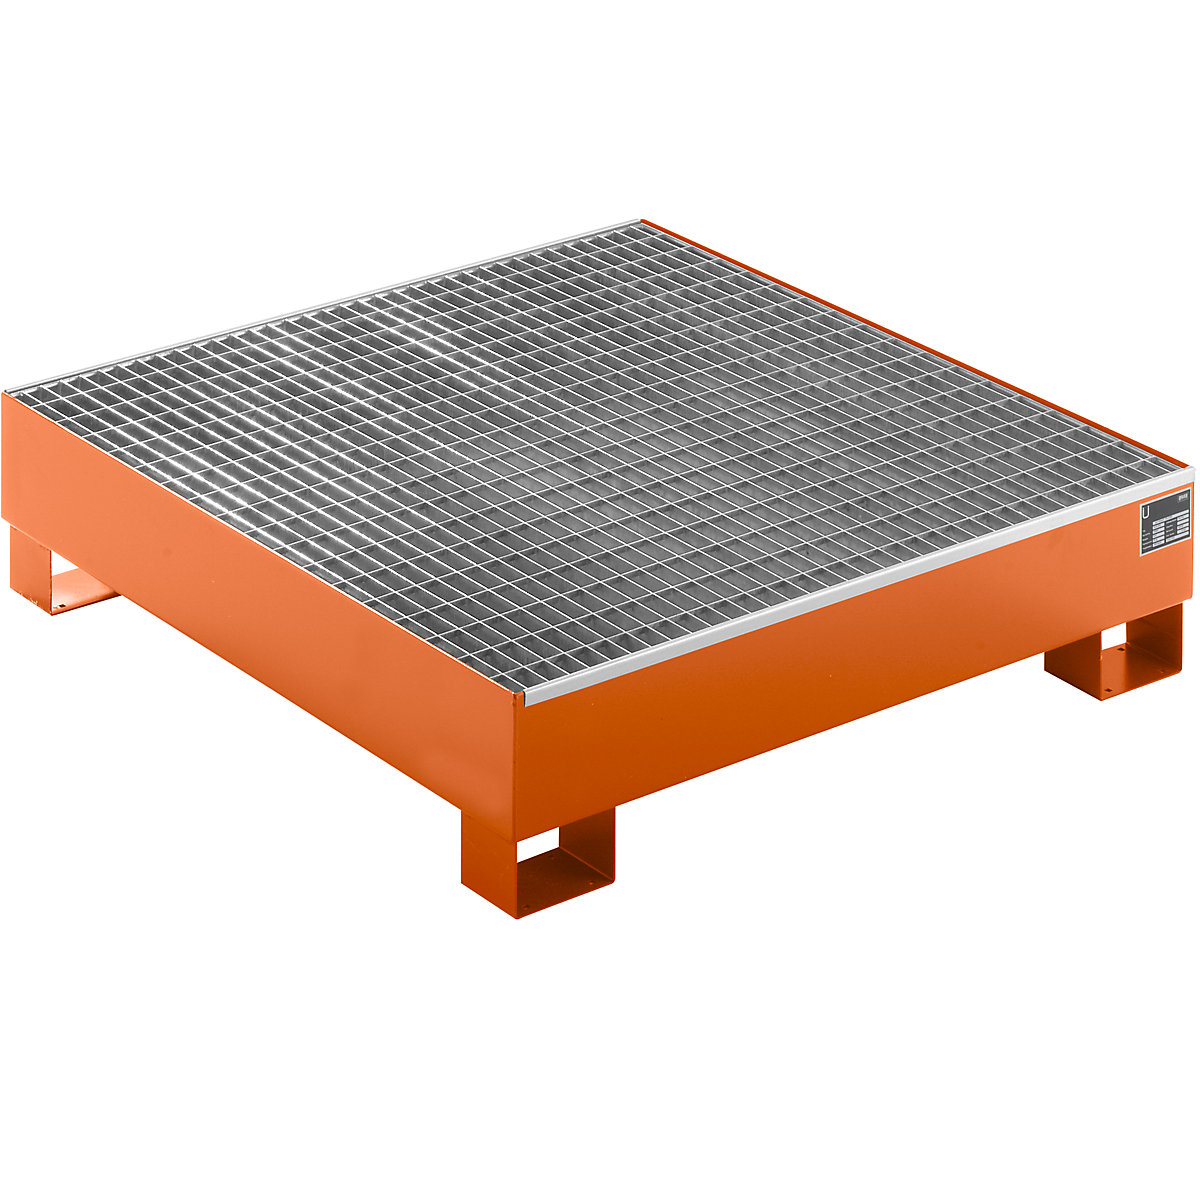 Sump tray made from sheet steel, LxWxH 1200 x 1200 x 285 mm, orange RAL 2000, with grate-7